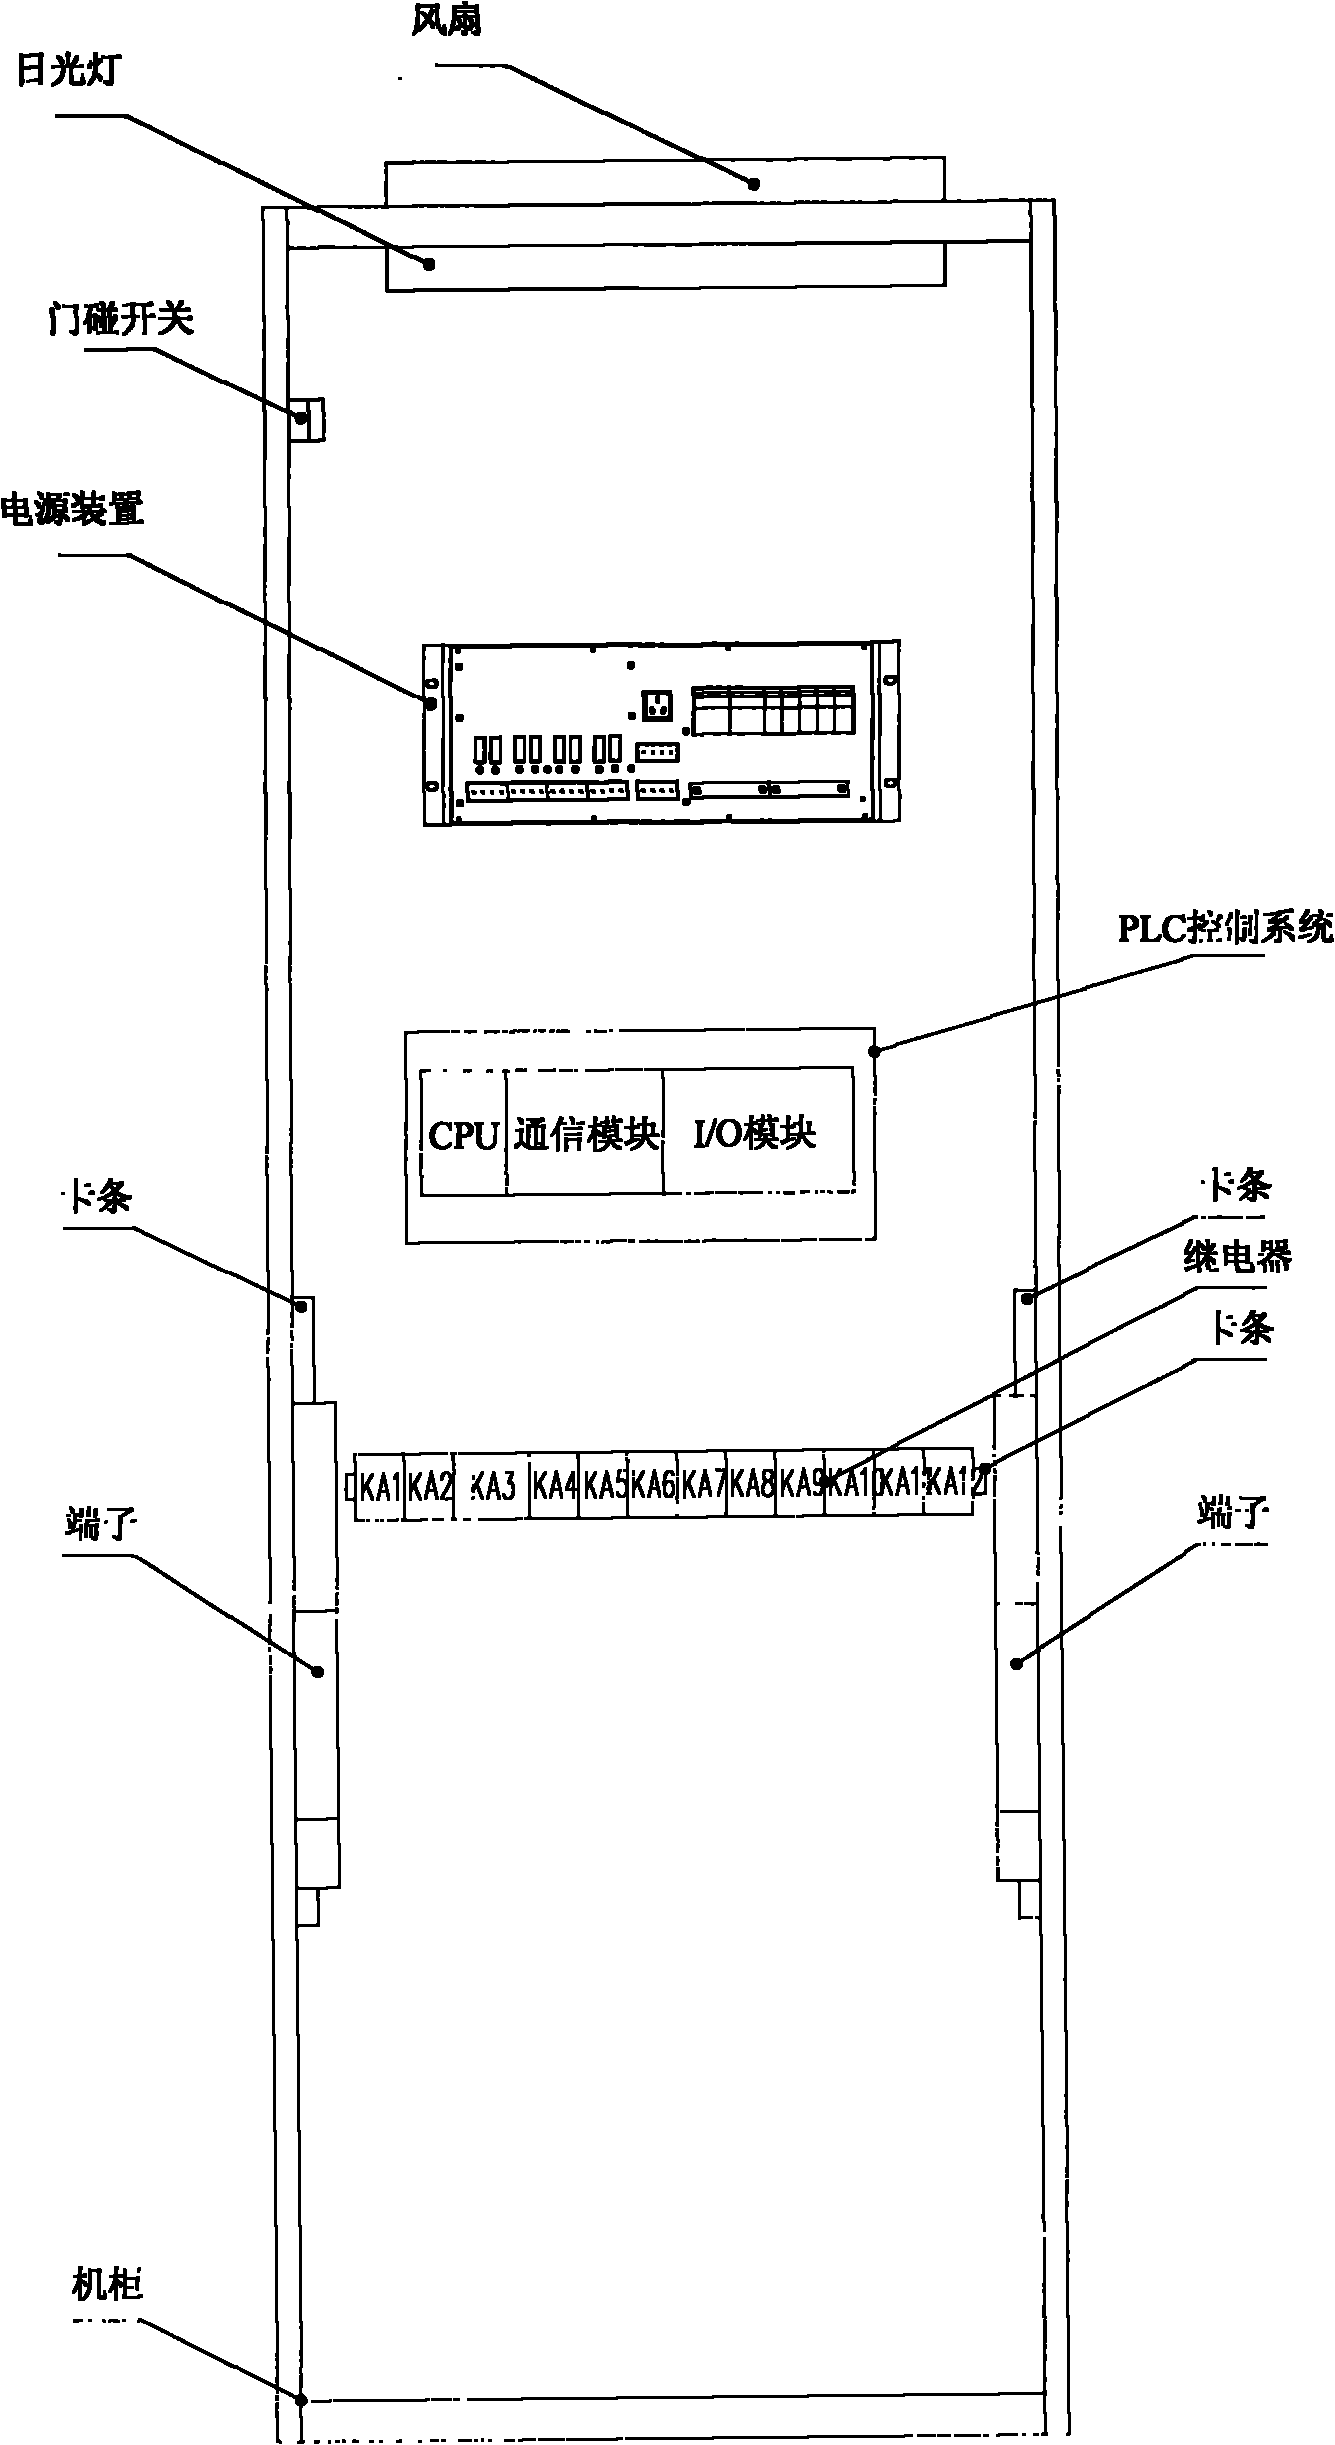 Isolated power grid multi-unit parallel load distribution control system